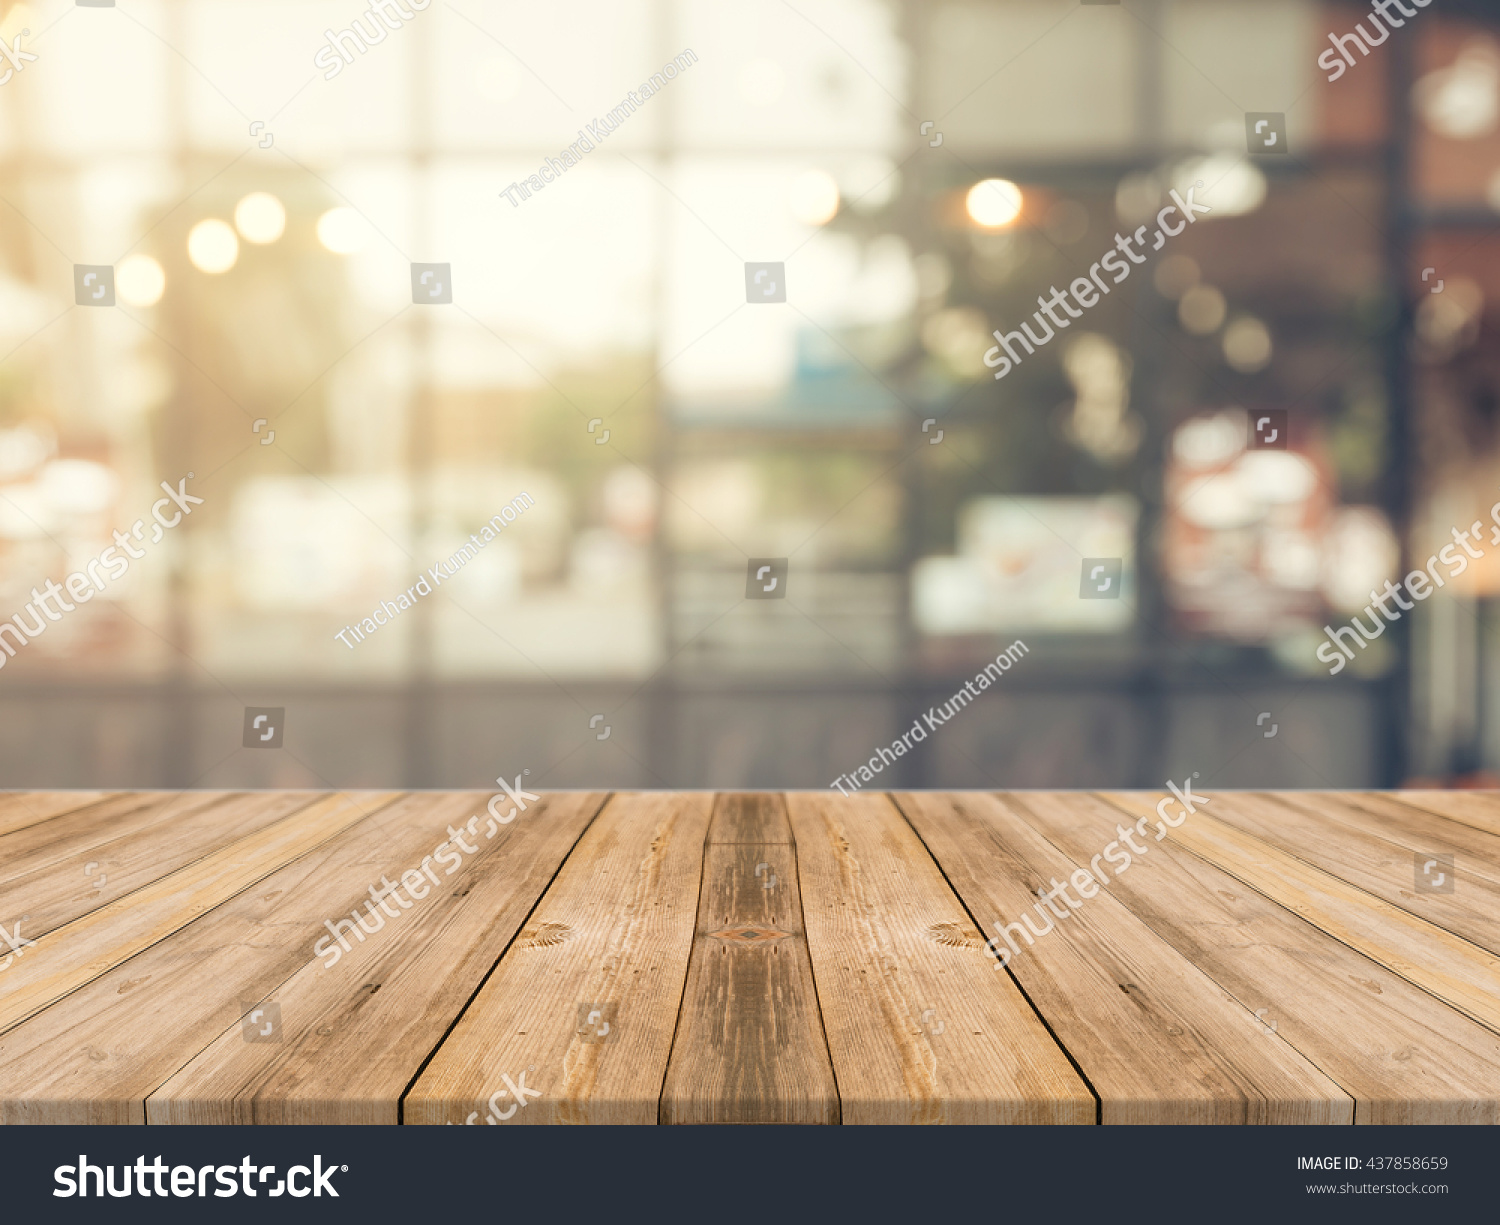 Wooden board empty table in front of blurred background. Perspective brown wood over blur in coffee shop - can be used for display or montage your products.Mock up for display of product. #437858659